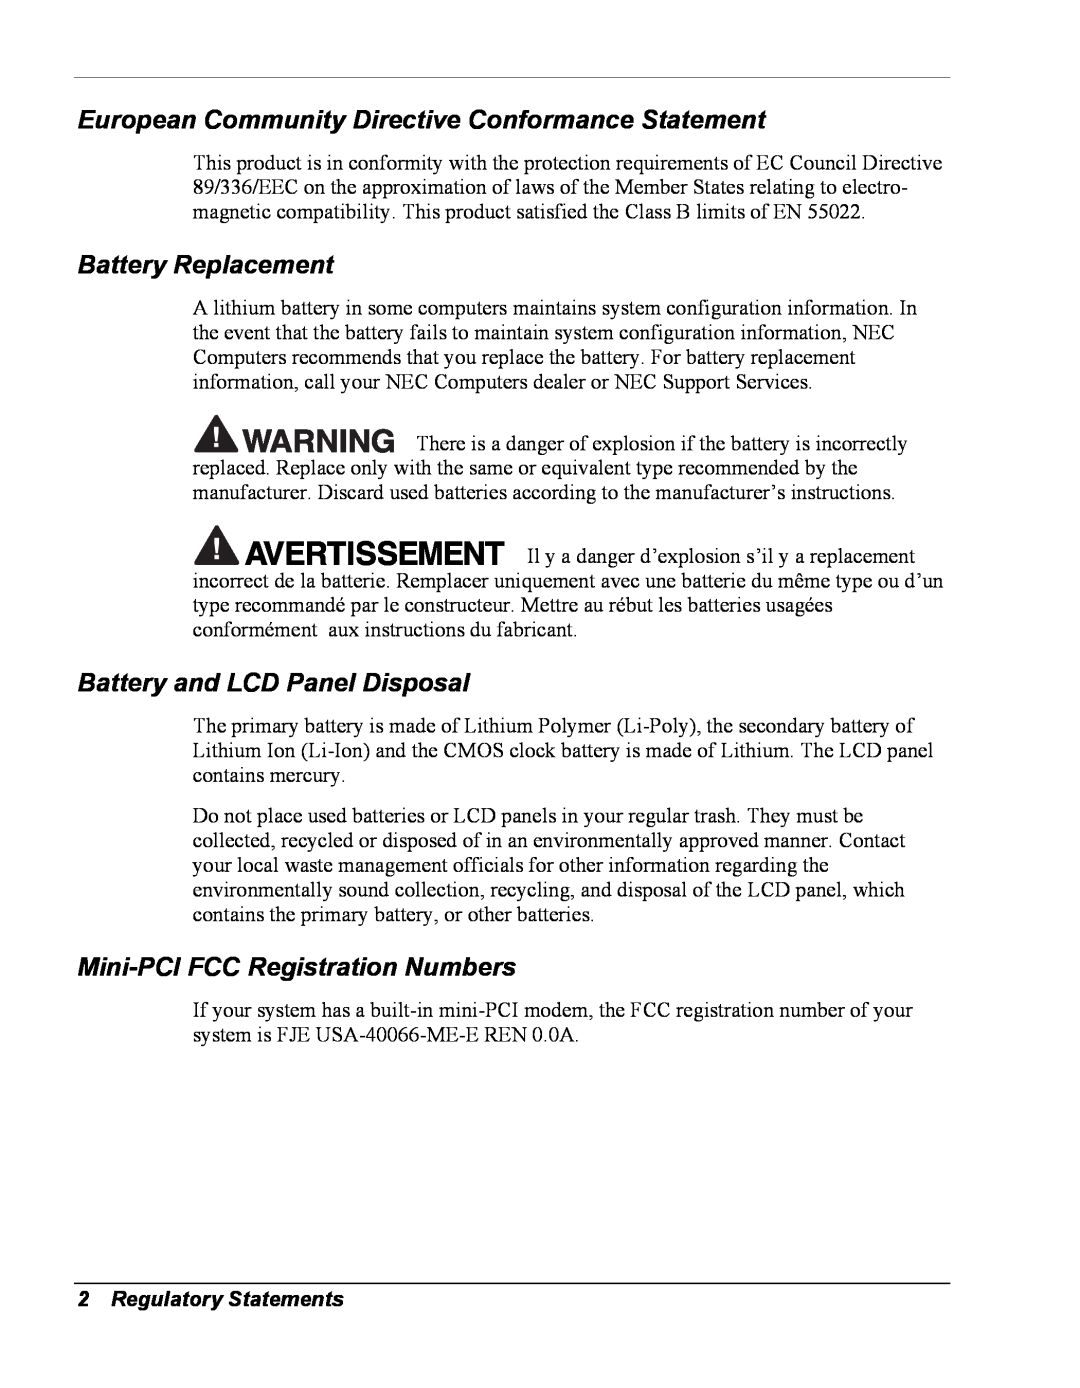 NEC Versa Series European Community Directive Conformance Statement, Battery Replacement, Battery and LCD Panel Disposal 